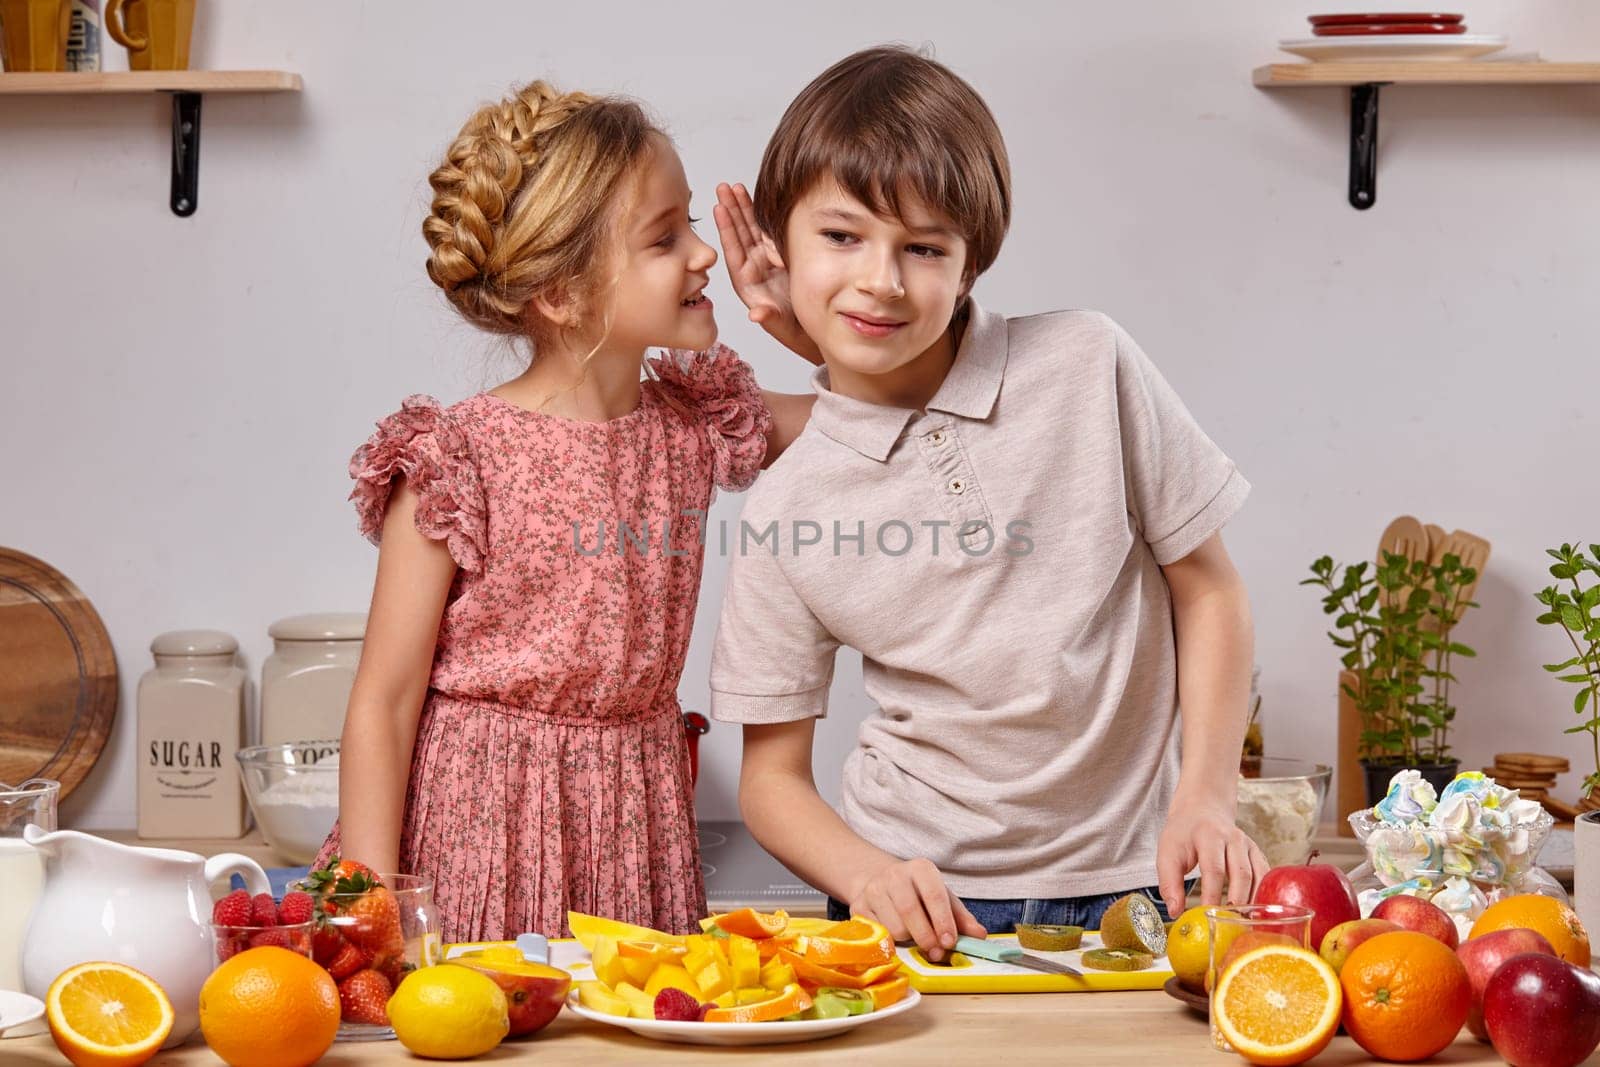 Cute kids are cooking together in a kitchen against a white wall with shelves on it. by nazarovsergey